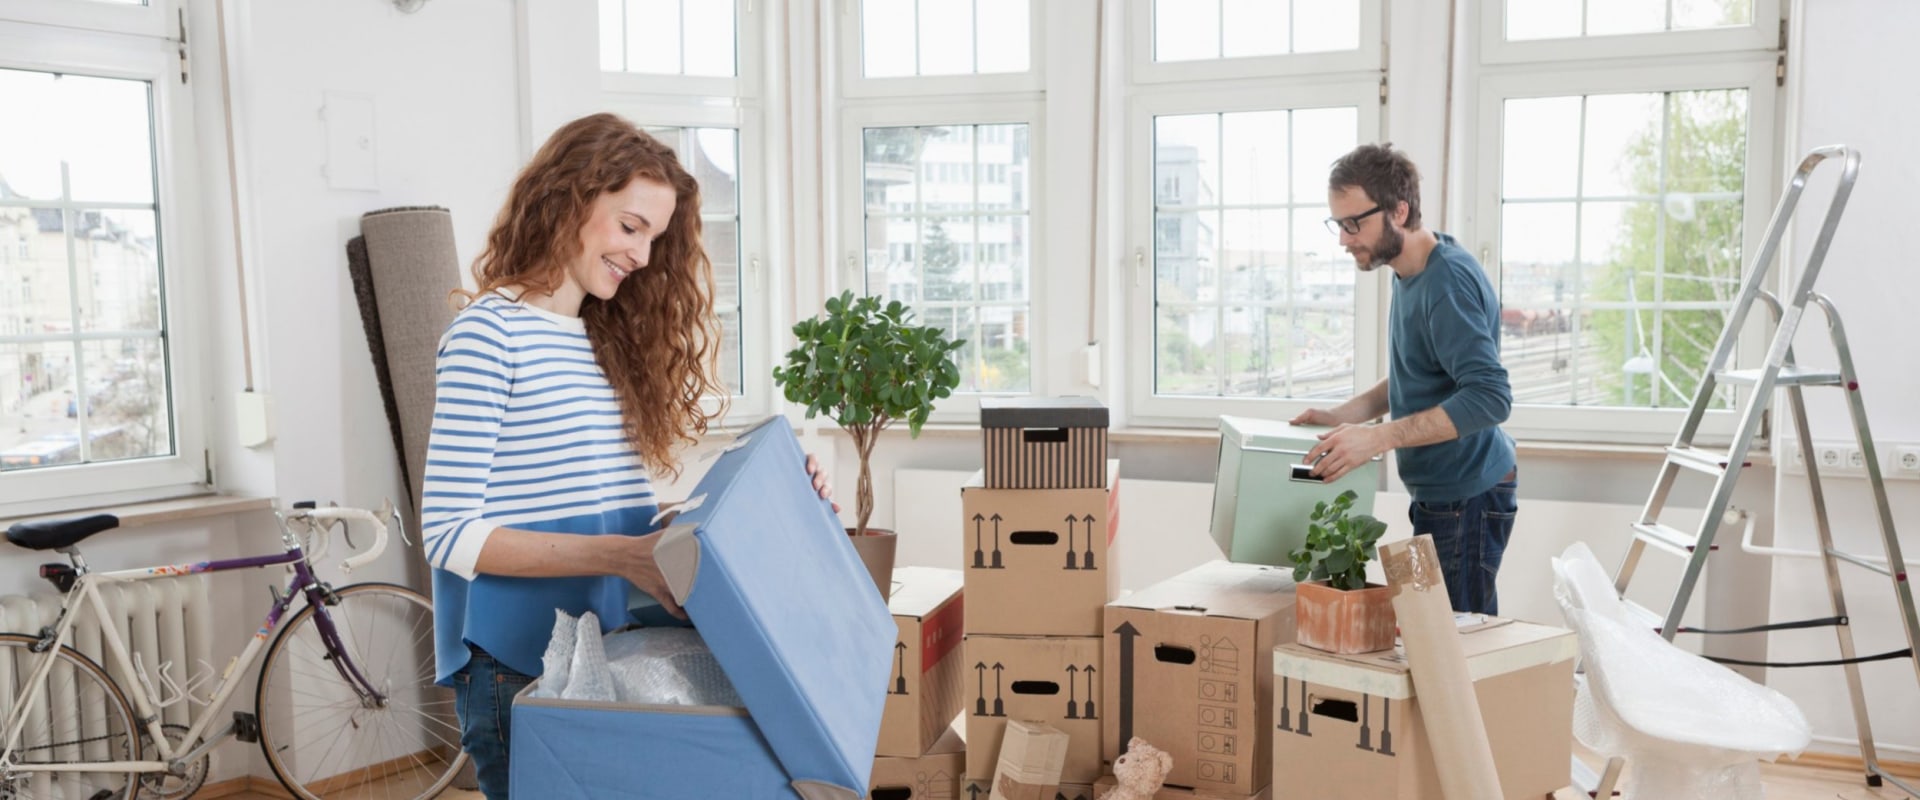 What are the most important things to consider when moving house?